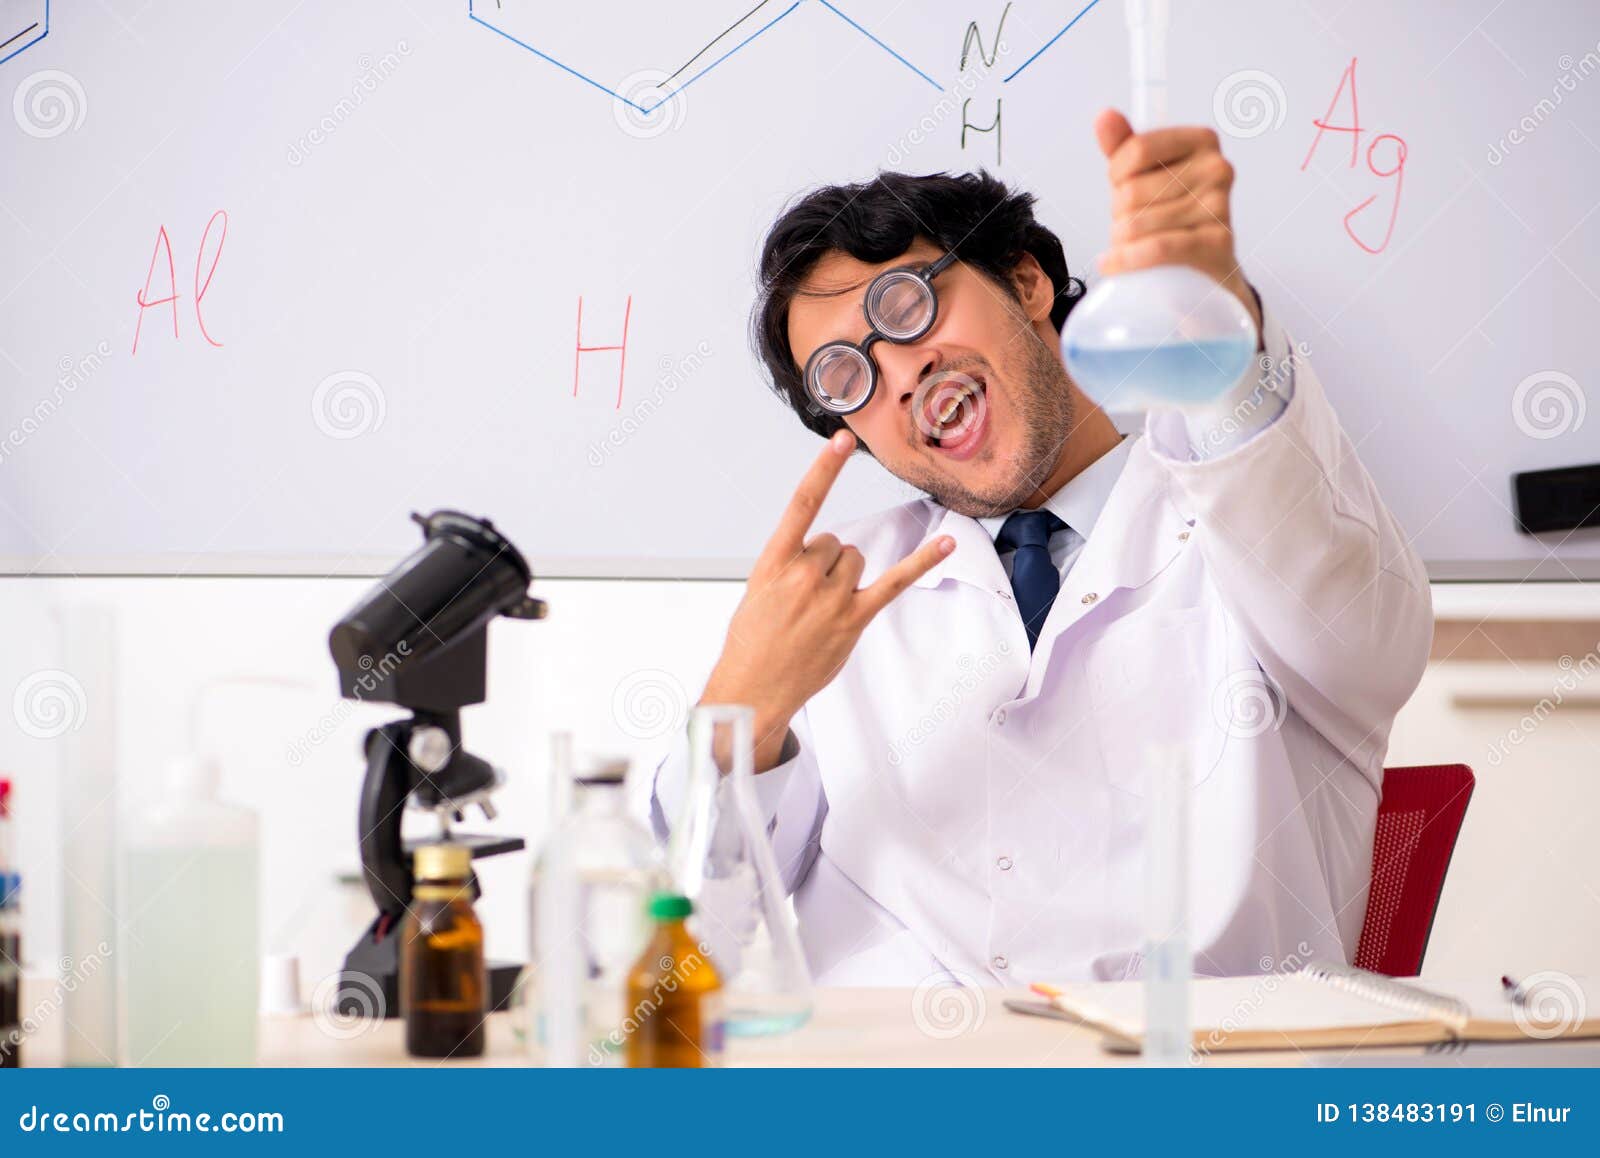 The Young Funny Chemist in Front of White Board Stock Image ...